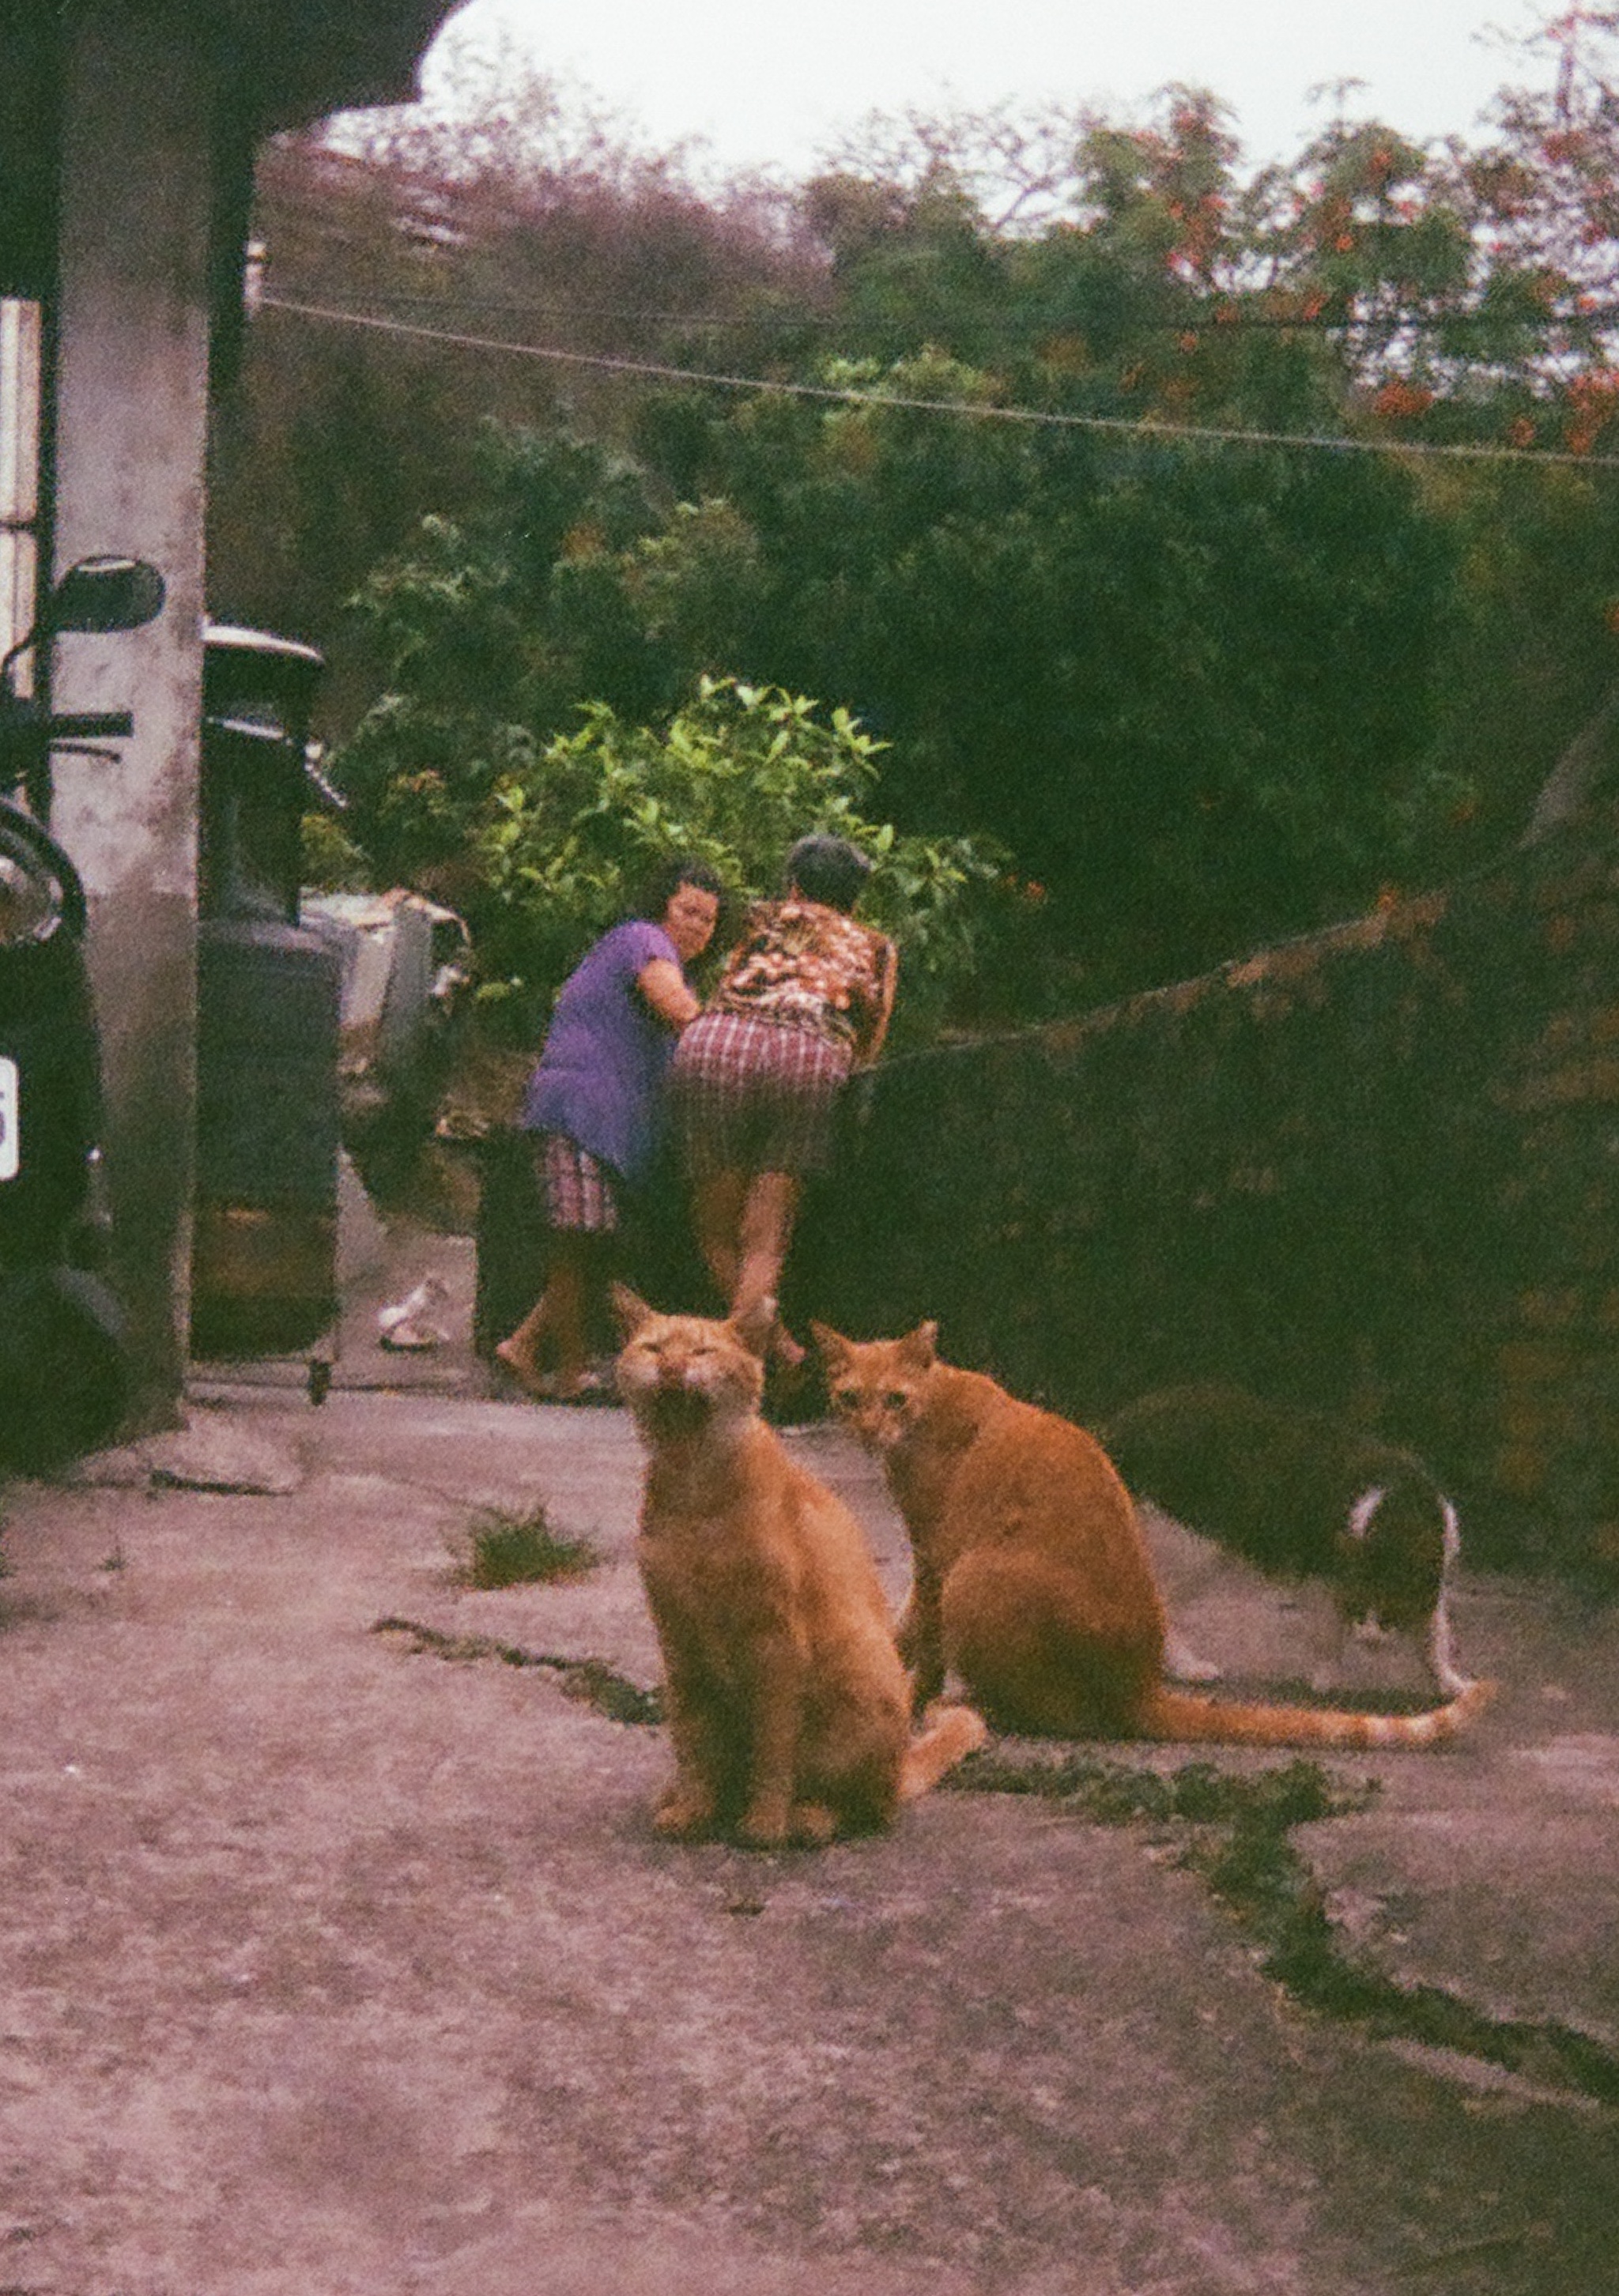 a group of cats sitting on a sidewalk, one yawning, and two women talking behind them